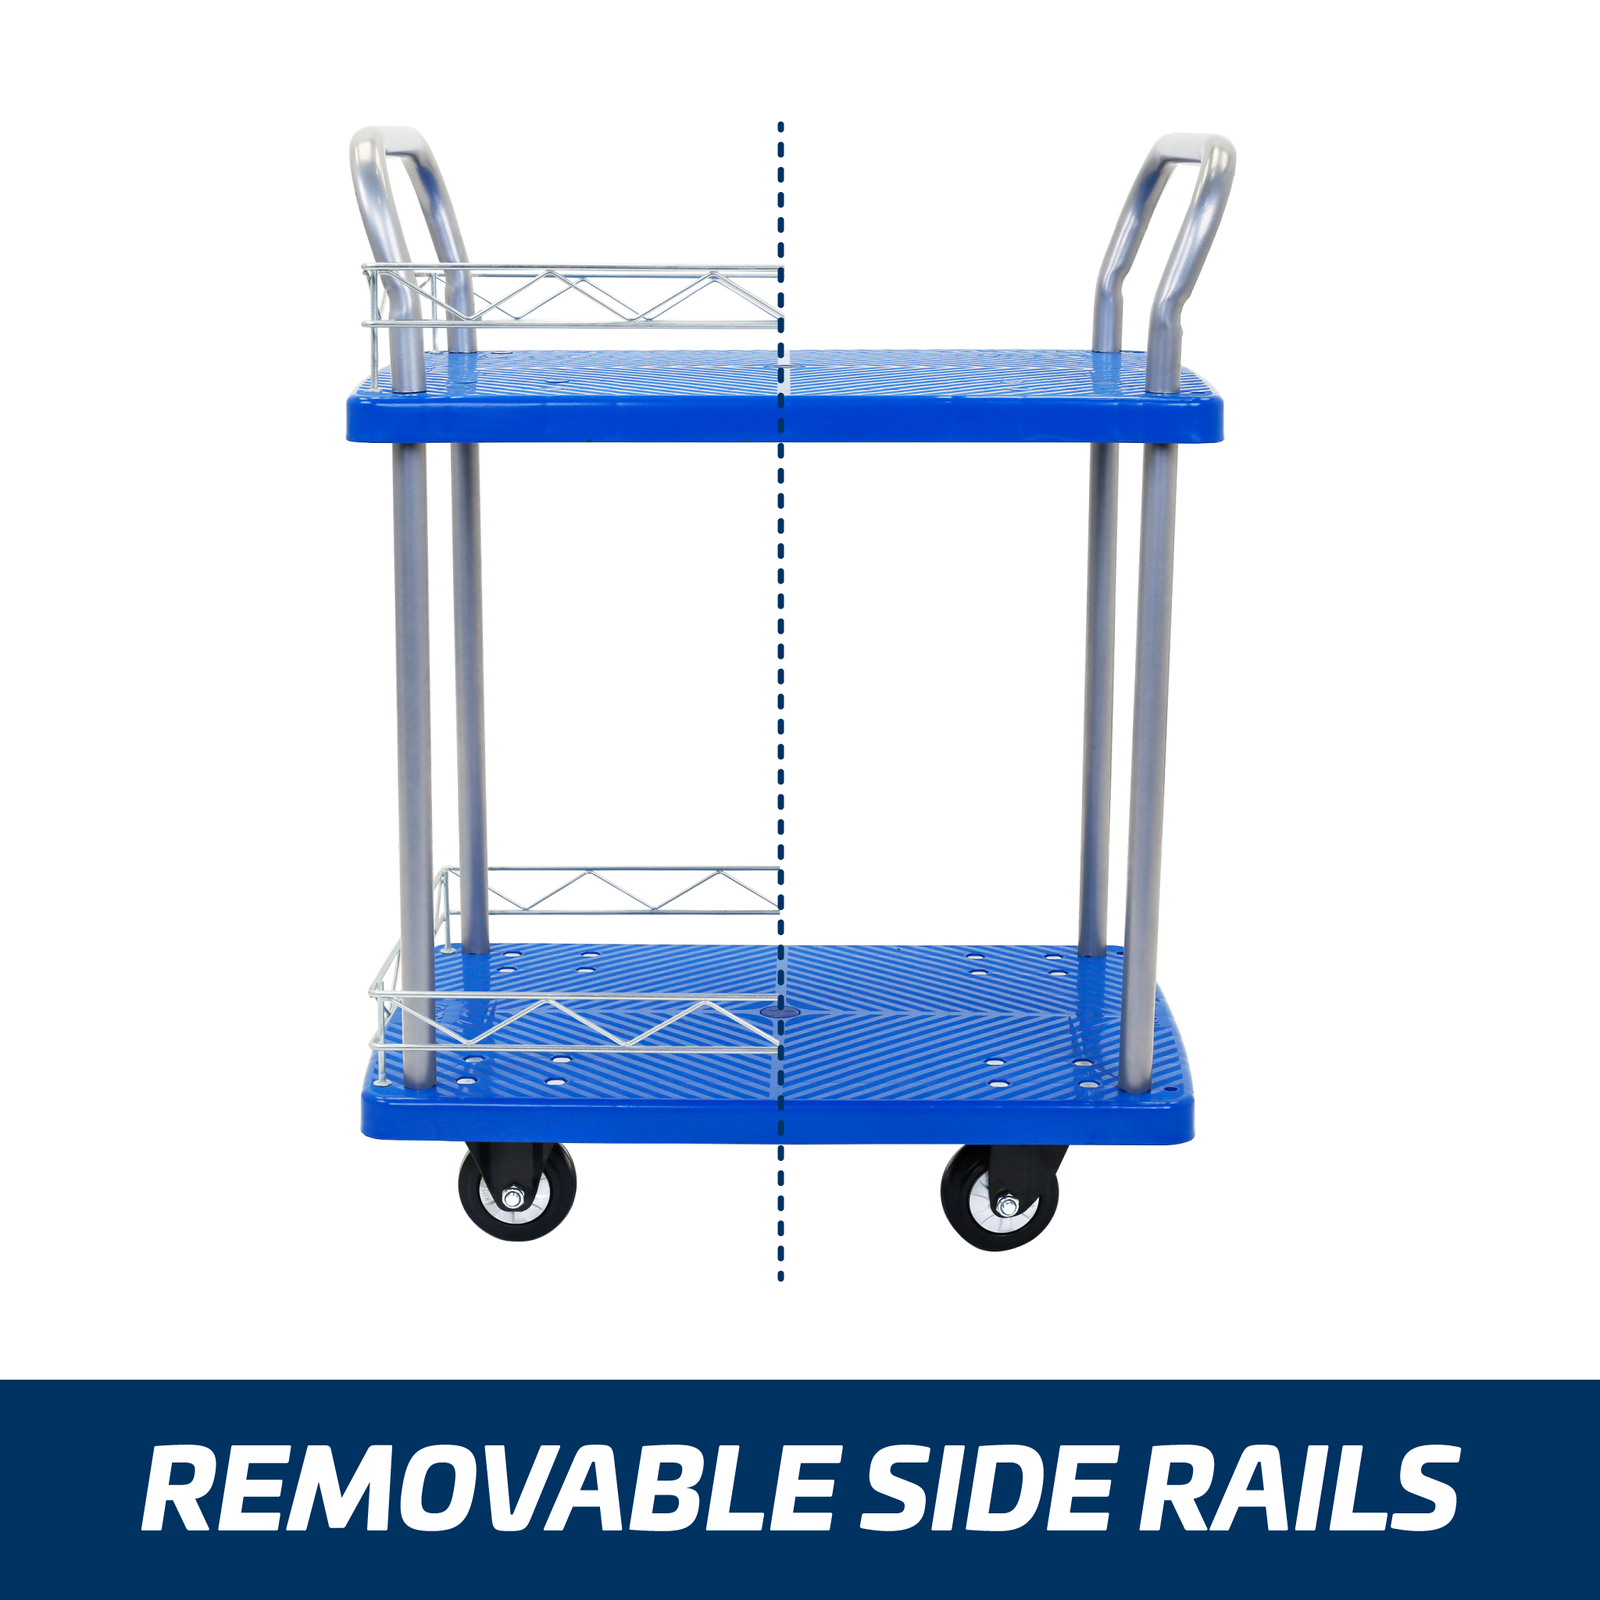 Frontal side of the Jorestech 2 shelf utility push cart. It is shown how the cart can be used with or without the removable hand rails